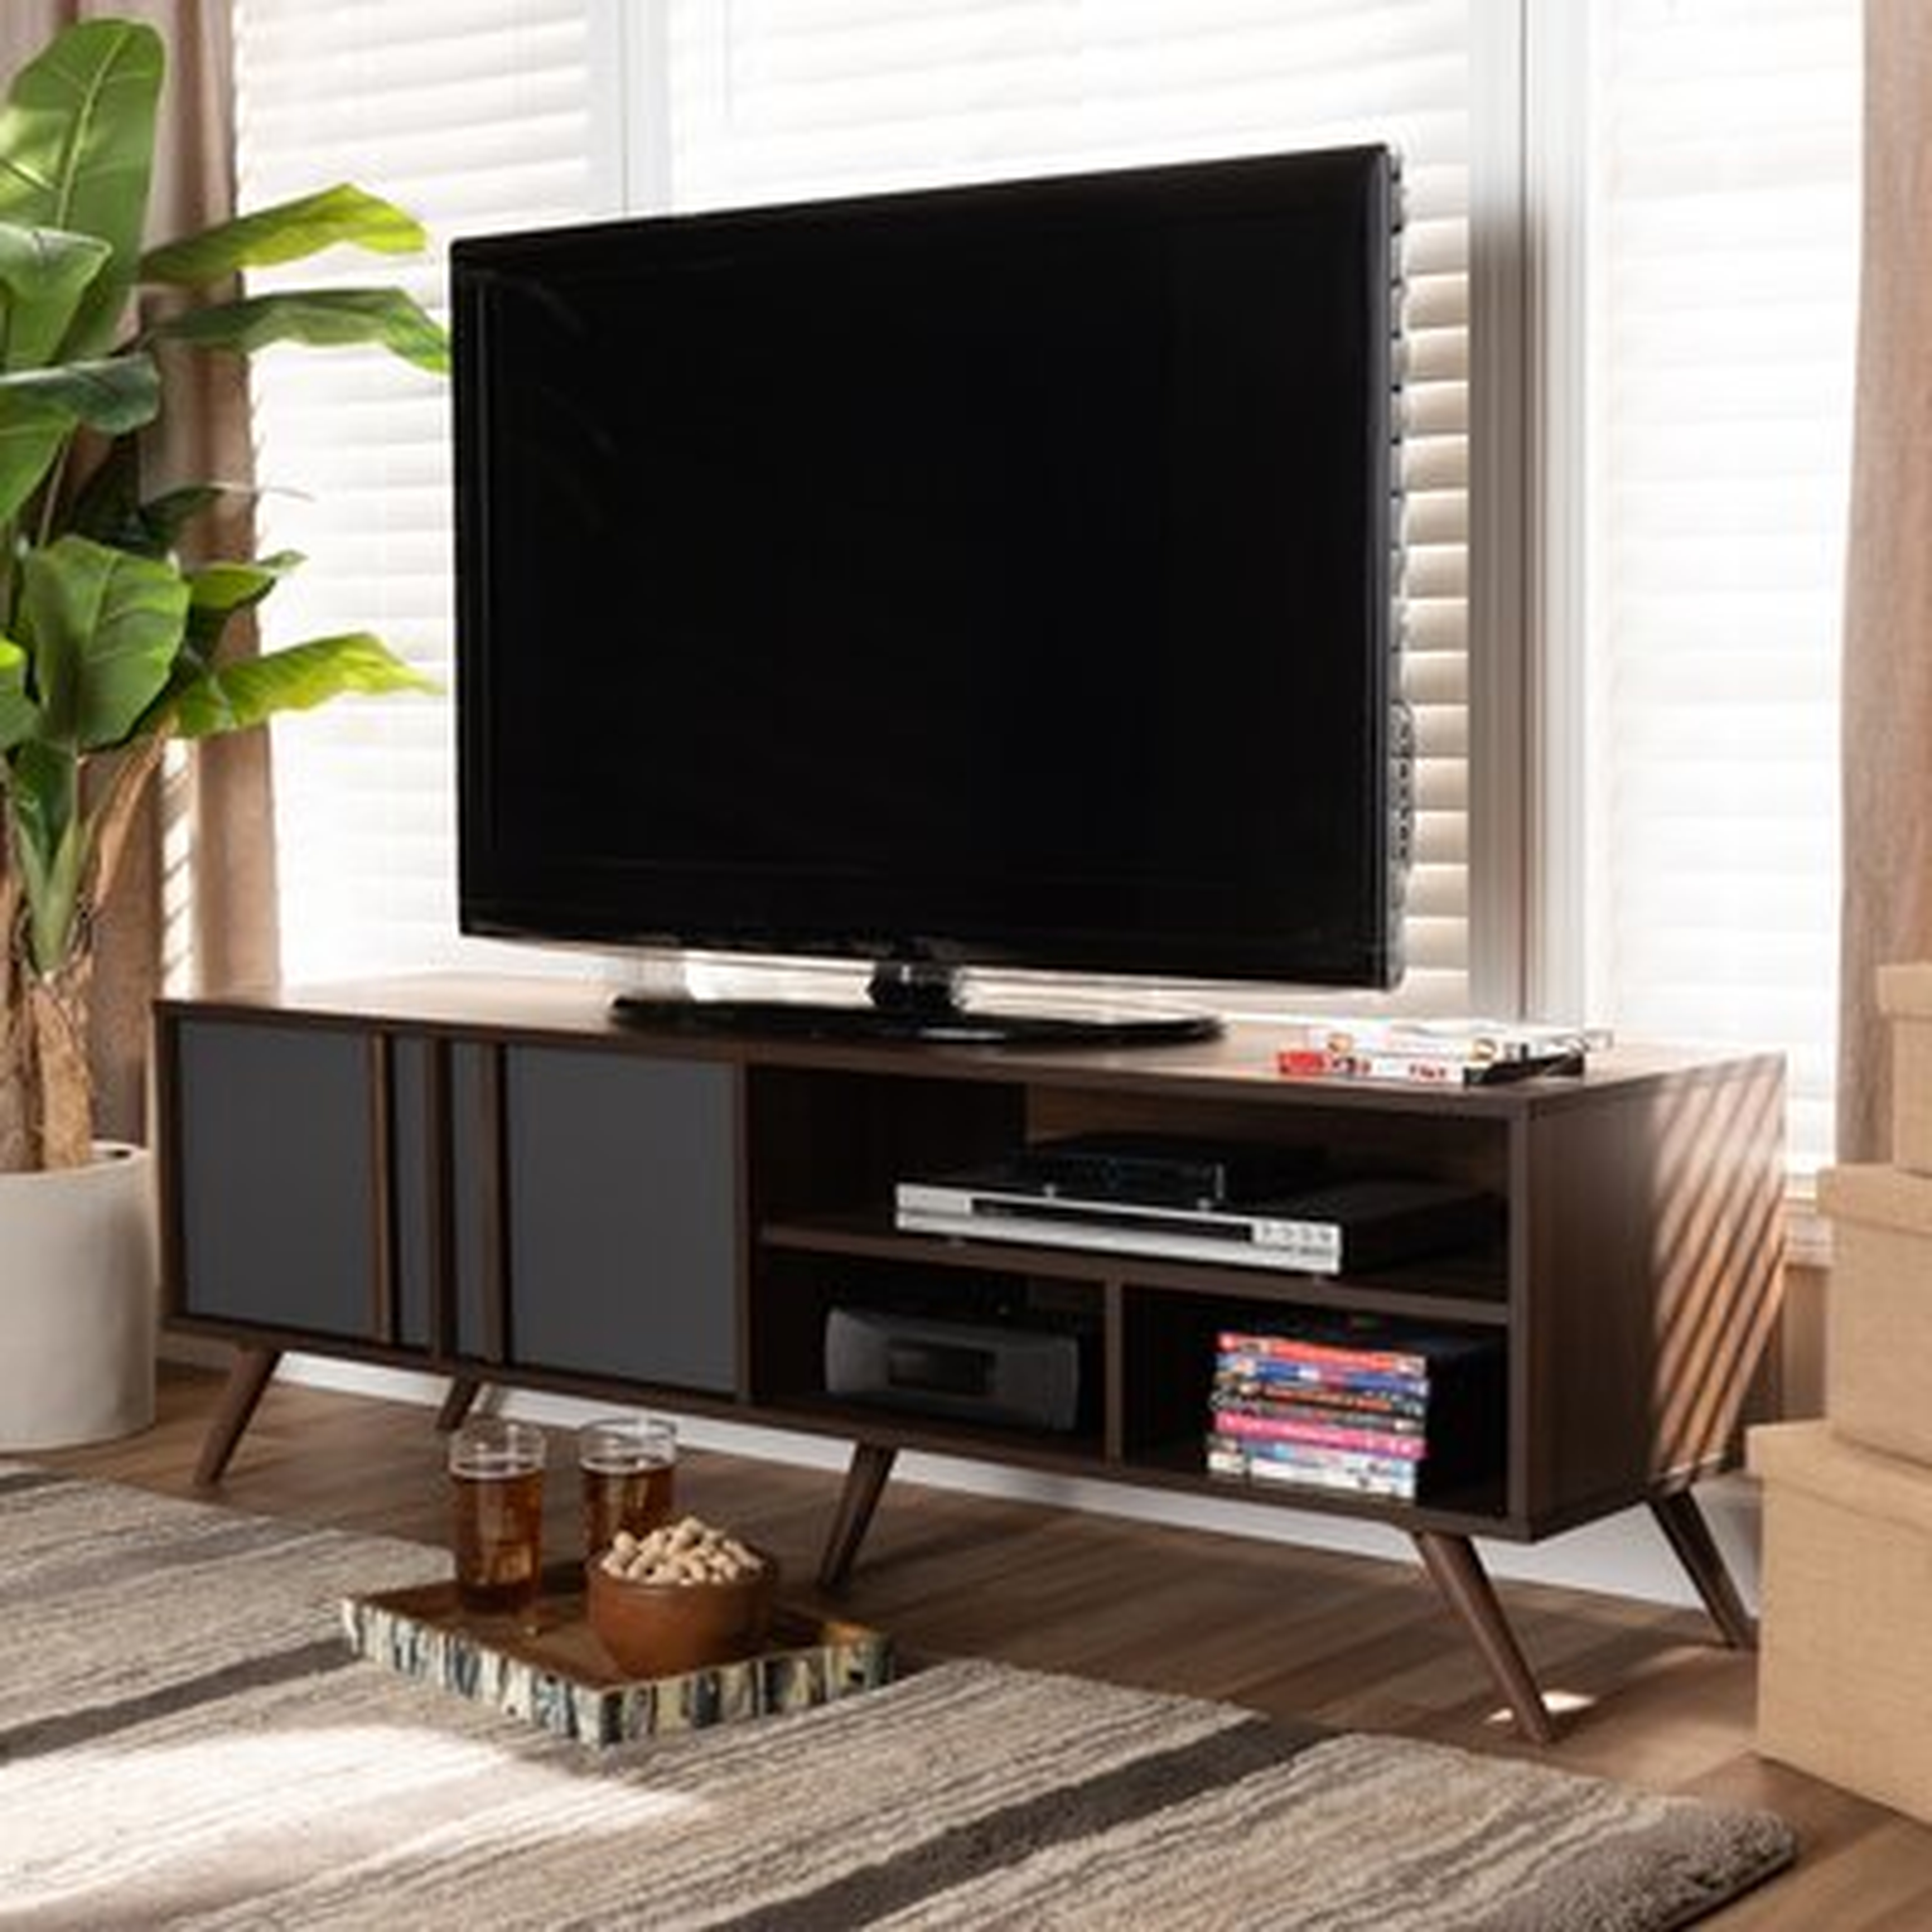 Hartselle TV Stand for TVs up to 55" - Wayfair